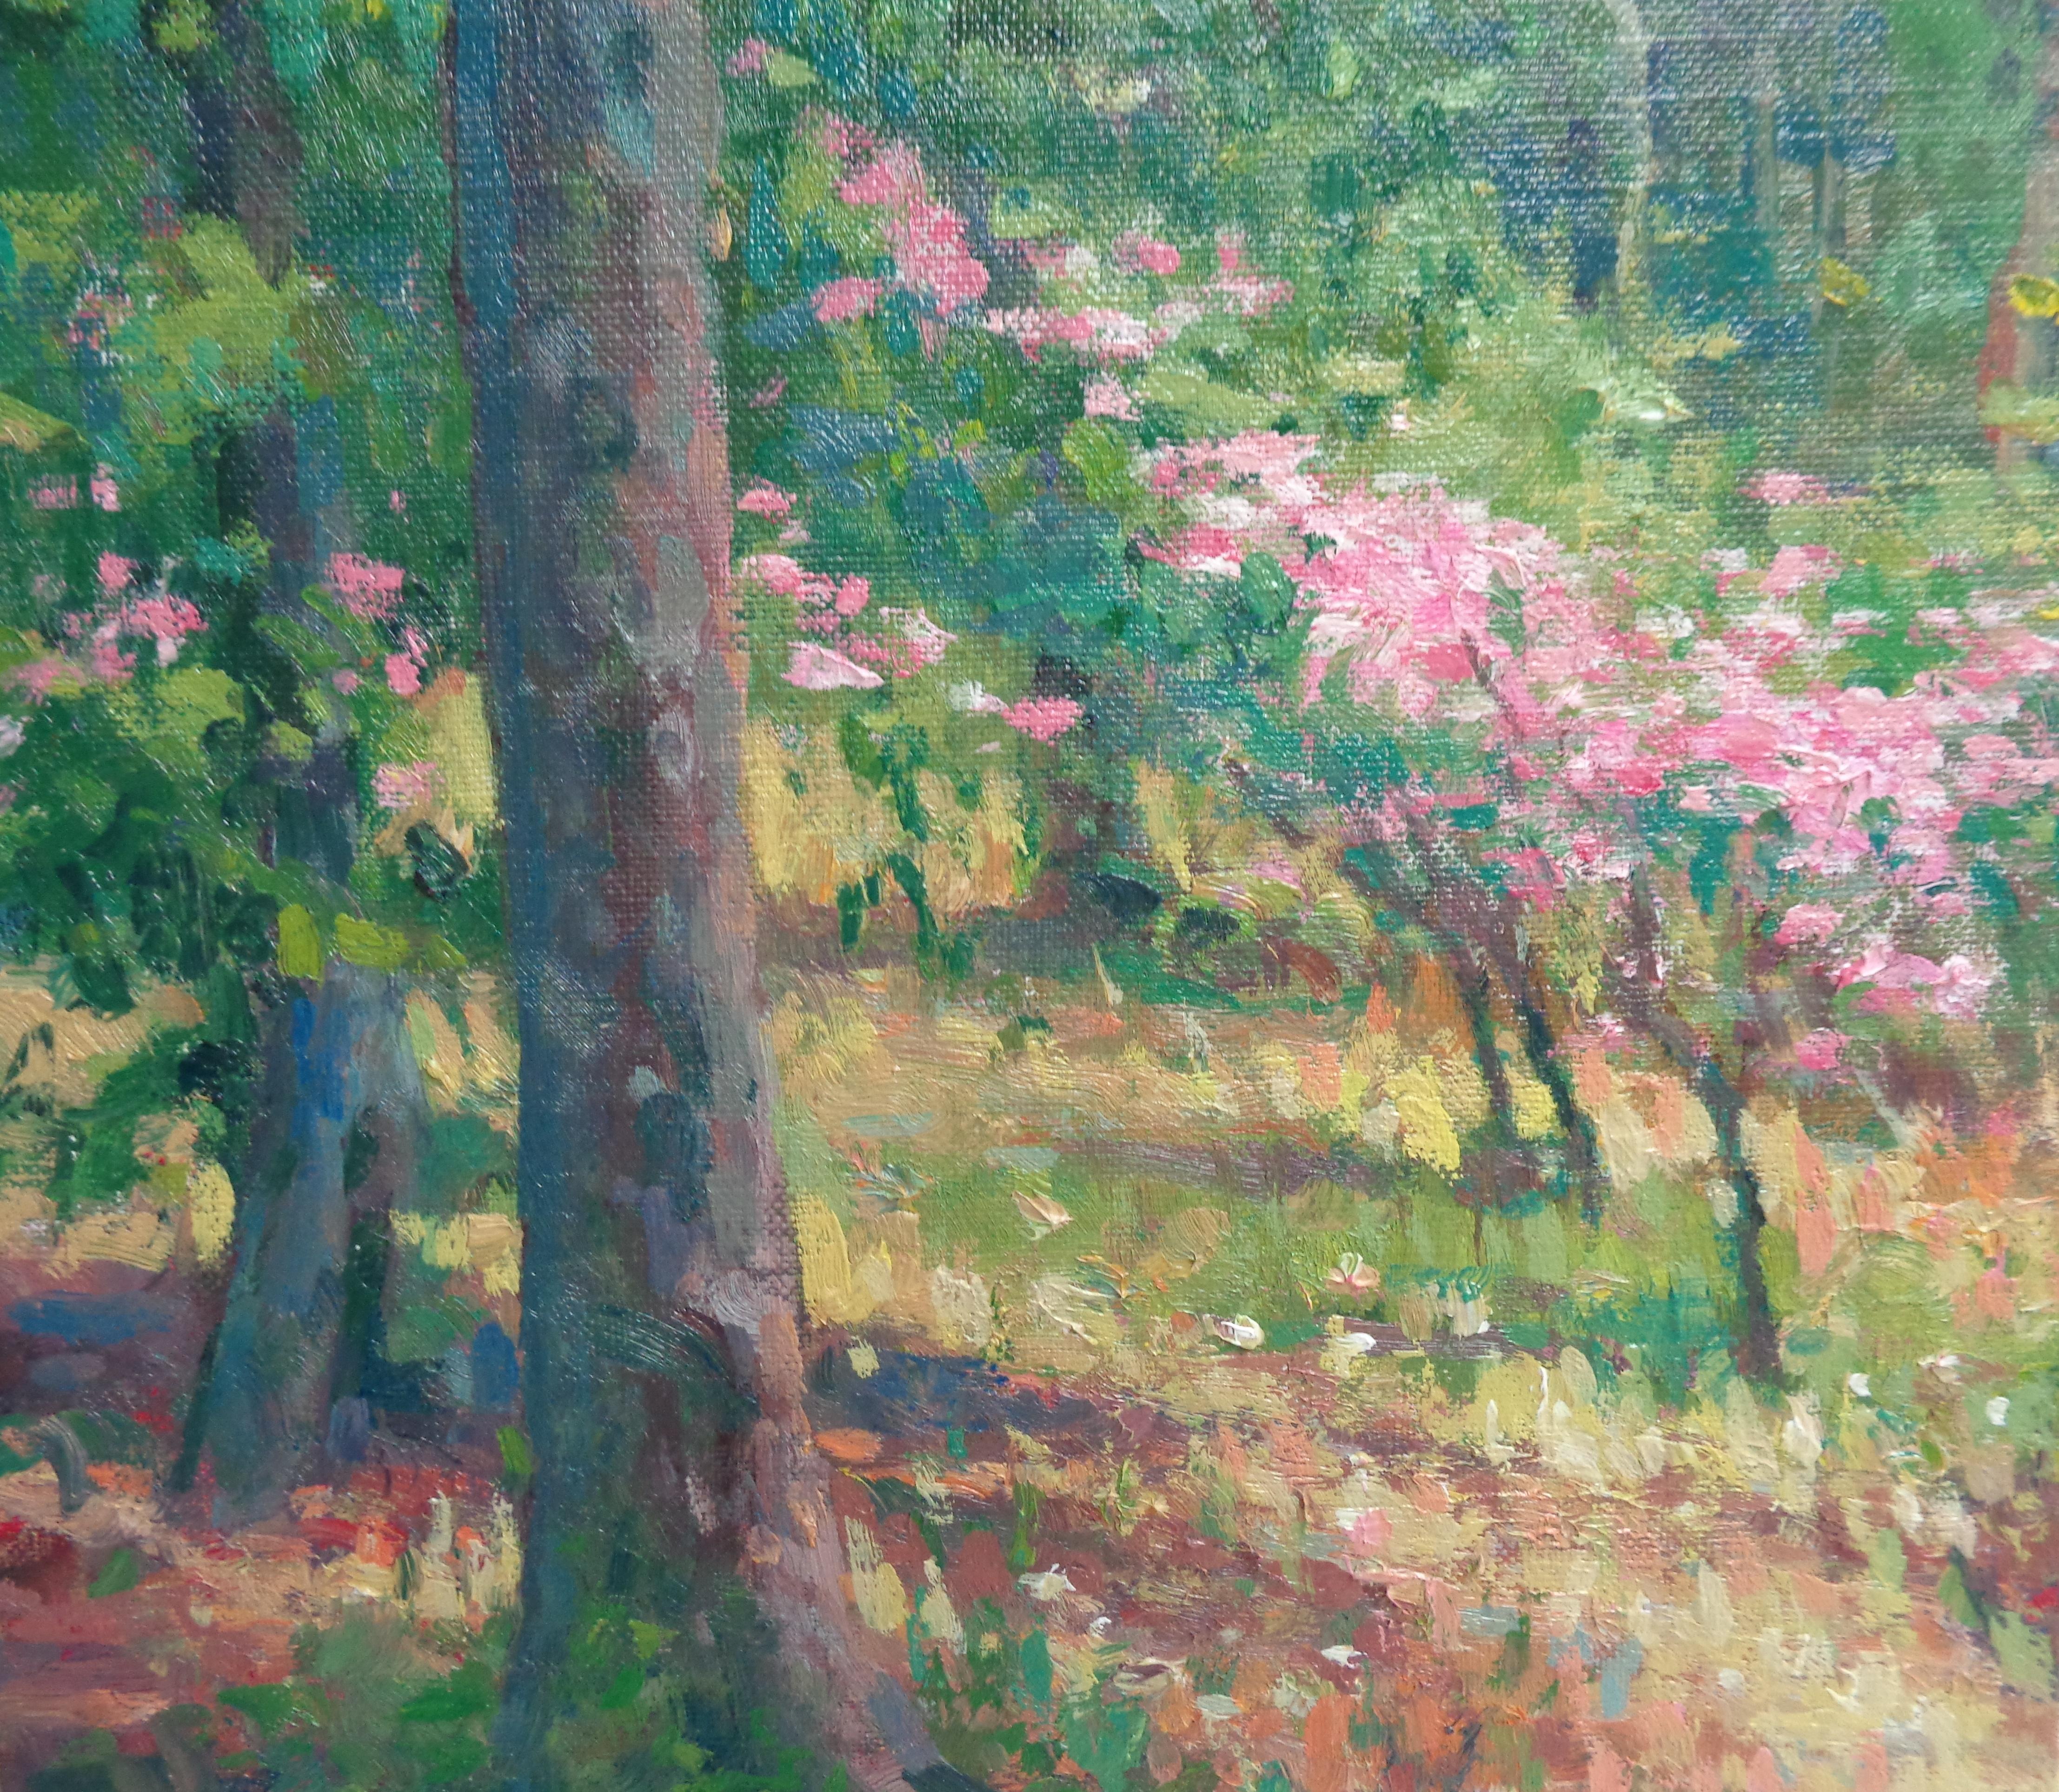  Impressionistic Floral Landscape Oil Painting by Michael Budden Early Spring For Sale 4